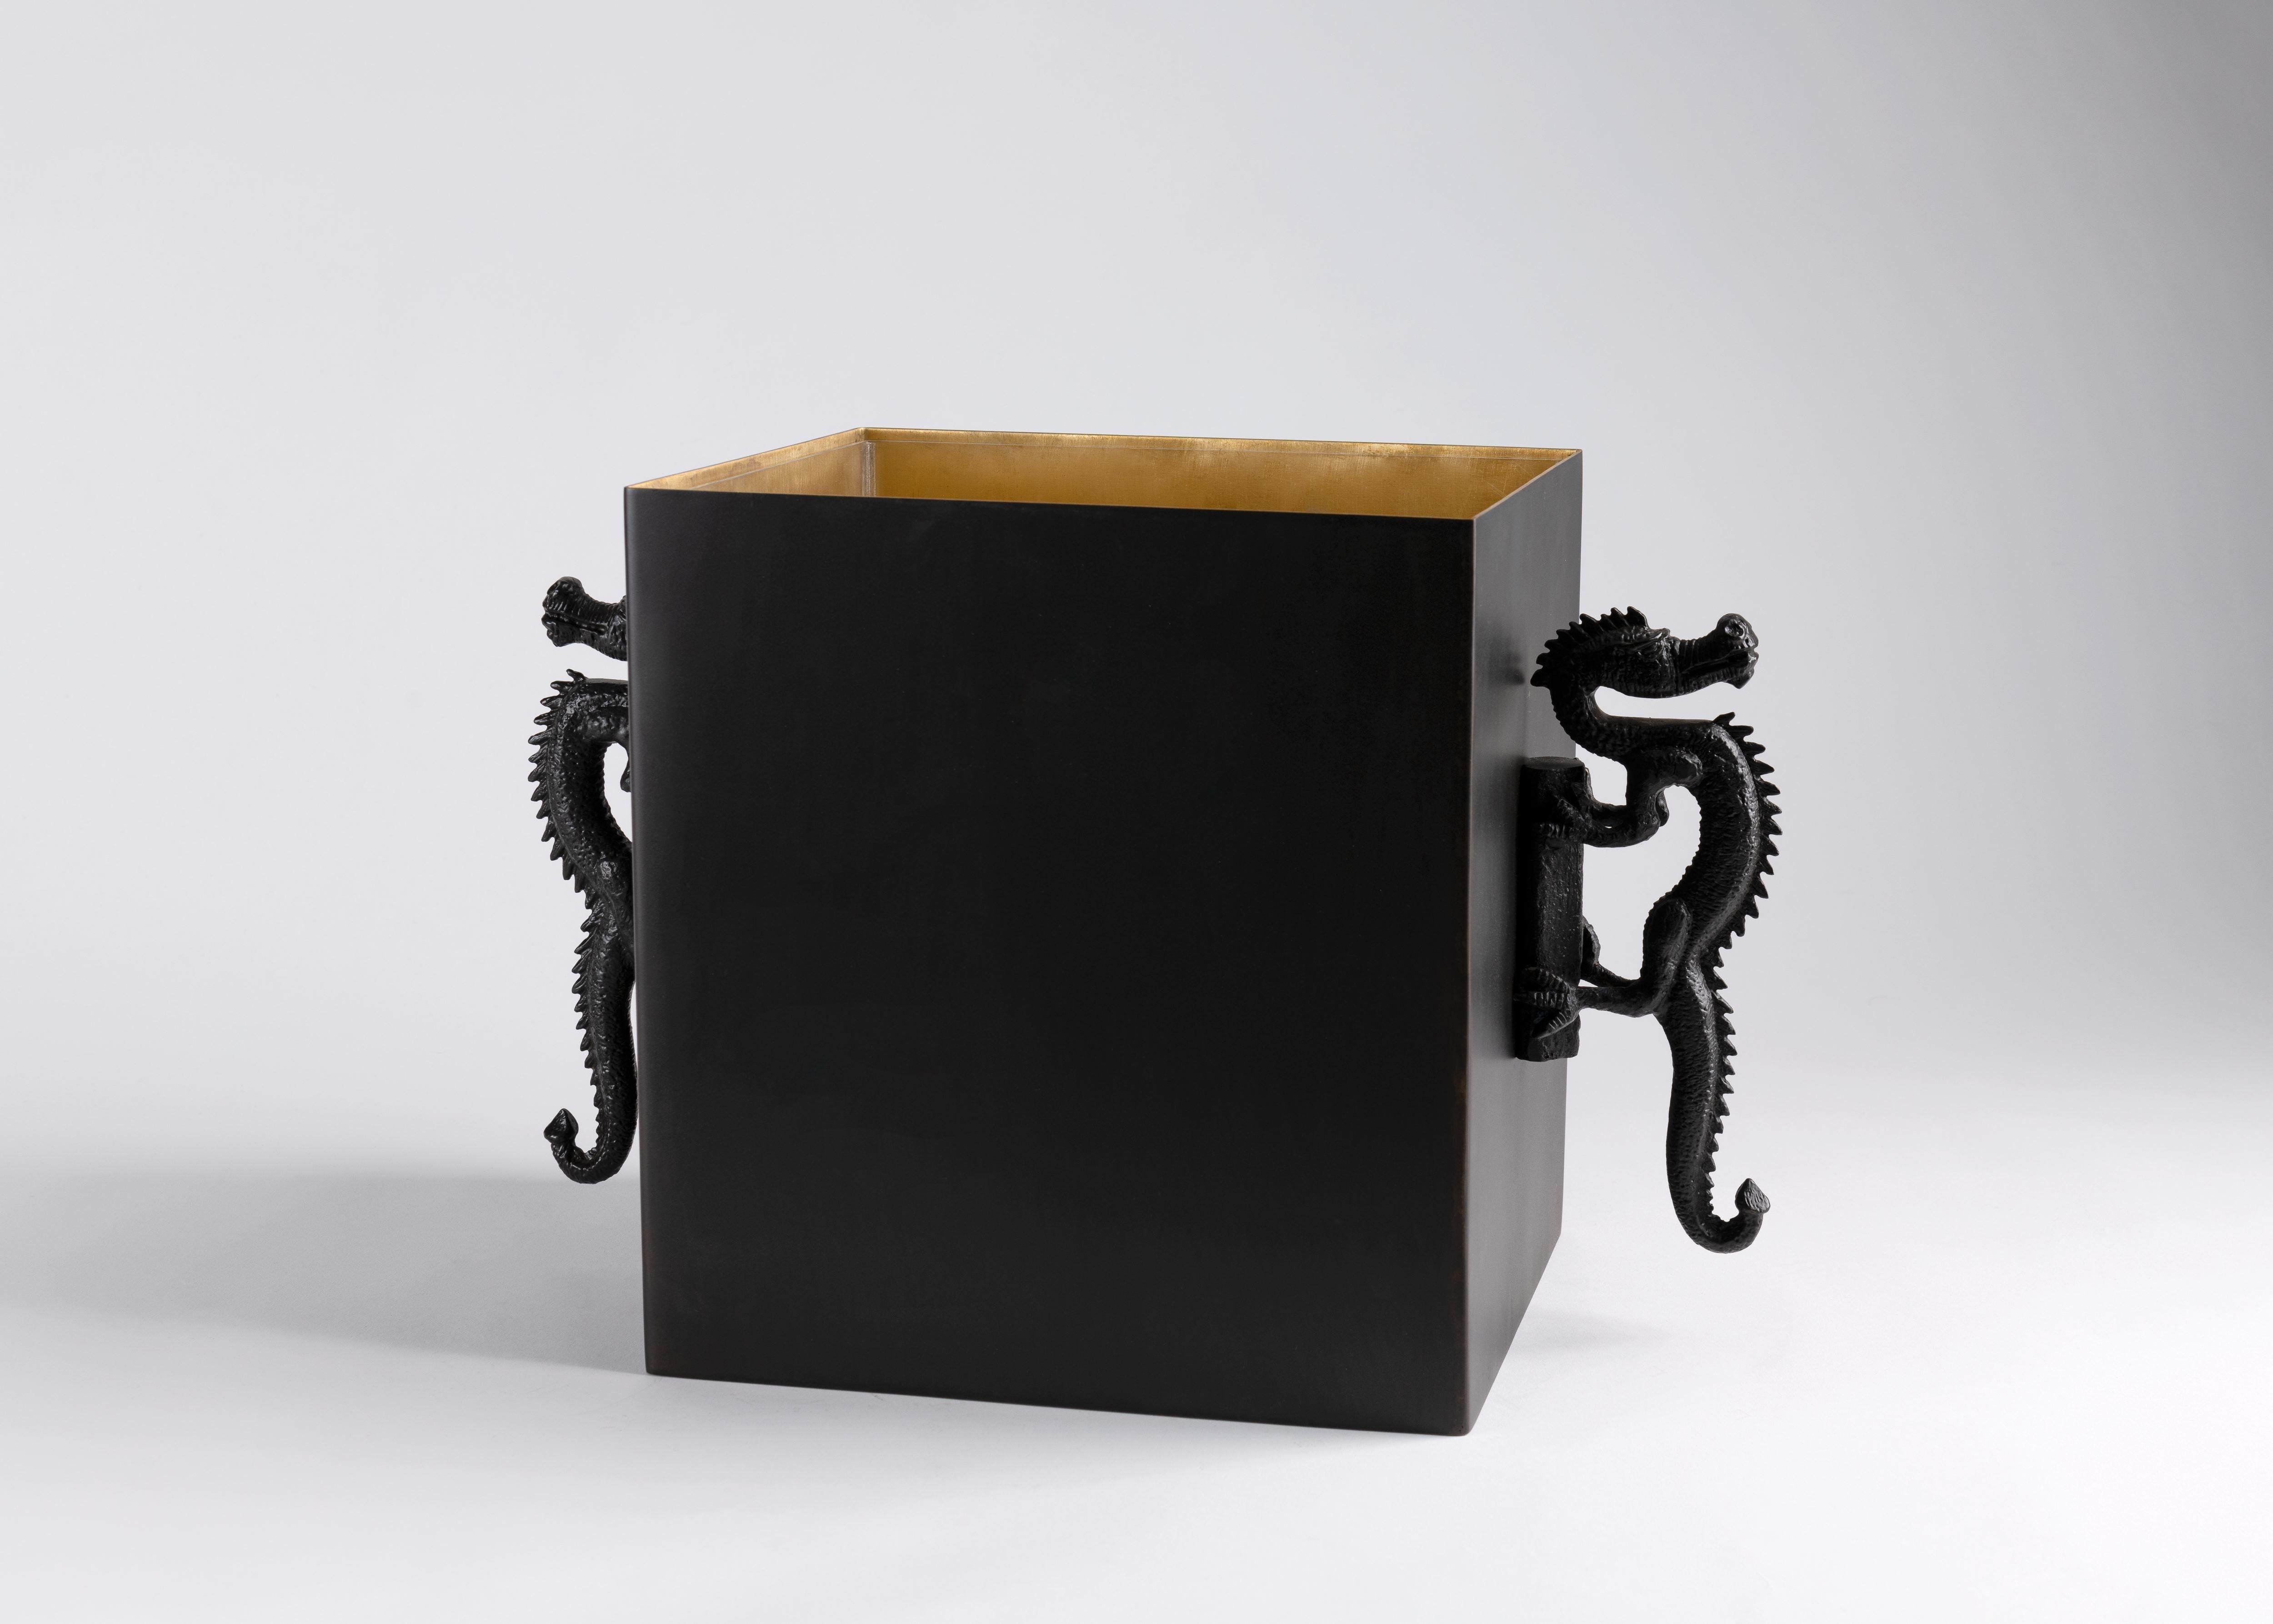 This deceptively simple container, made from sleek, black patinated bronze and lined with soft, contrasting brass, works as either a floor or tabletop vase. The pair of richly textured cast metal dragons that stare defiantly from either side serve